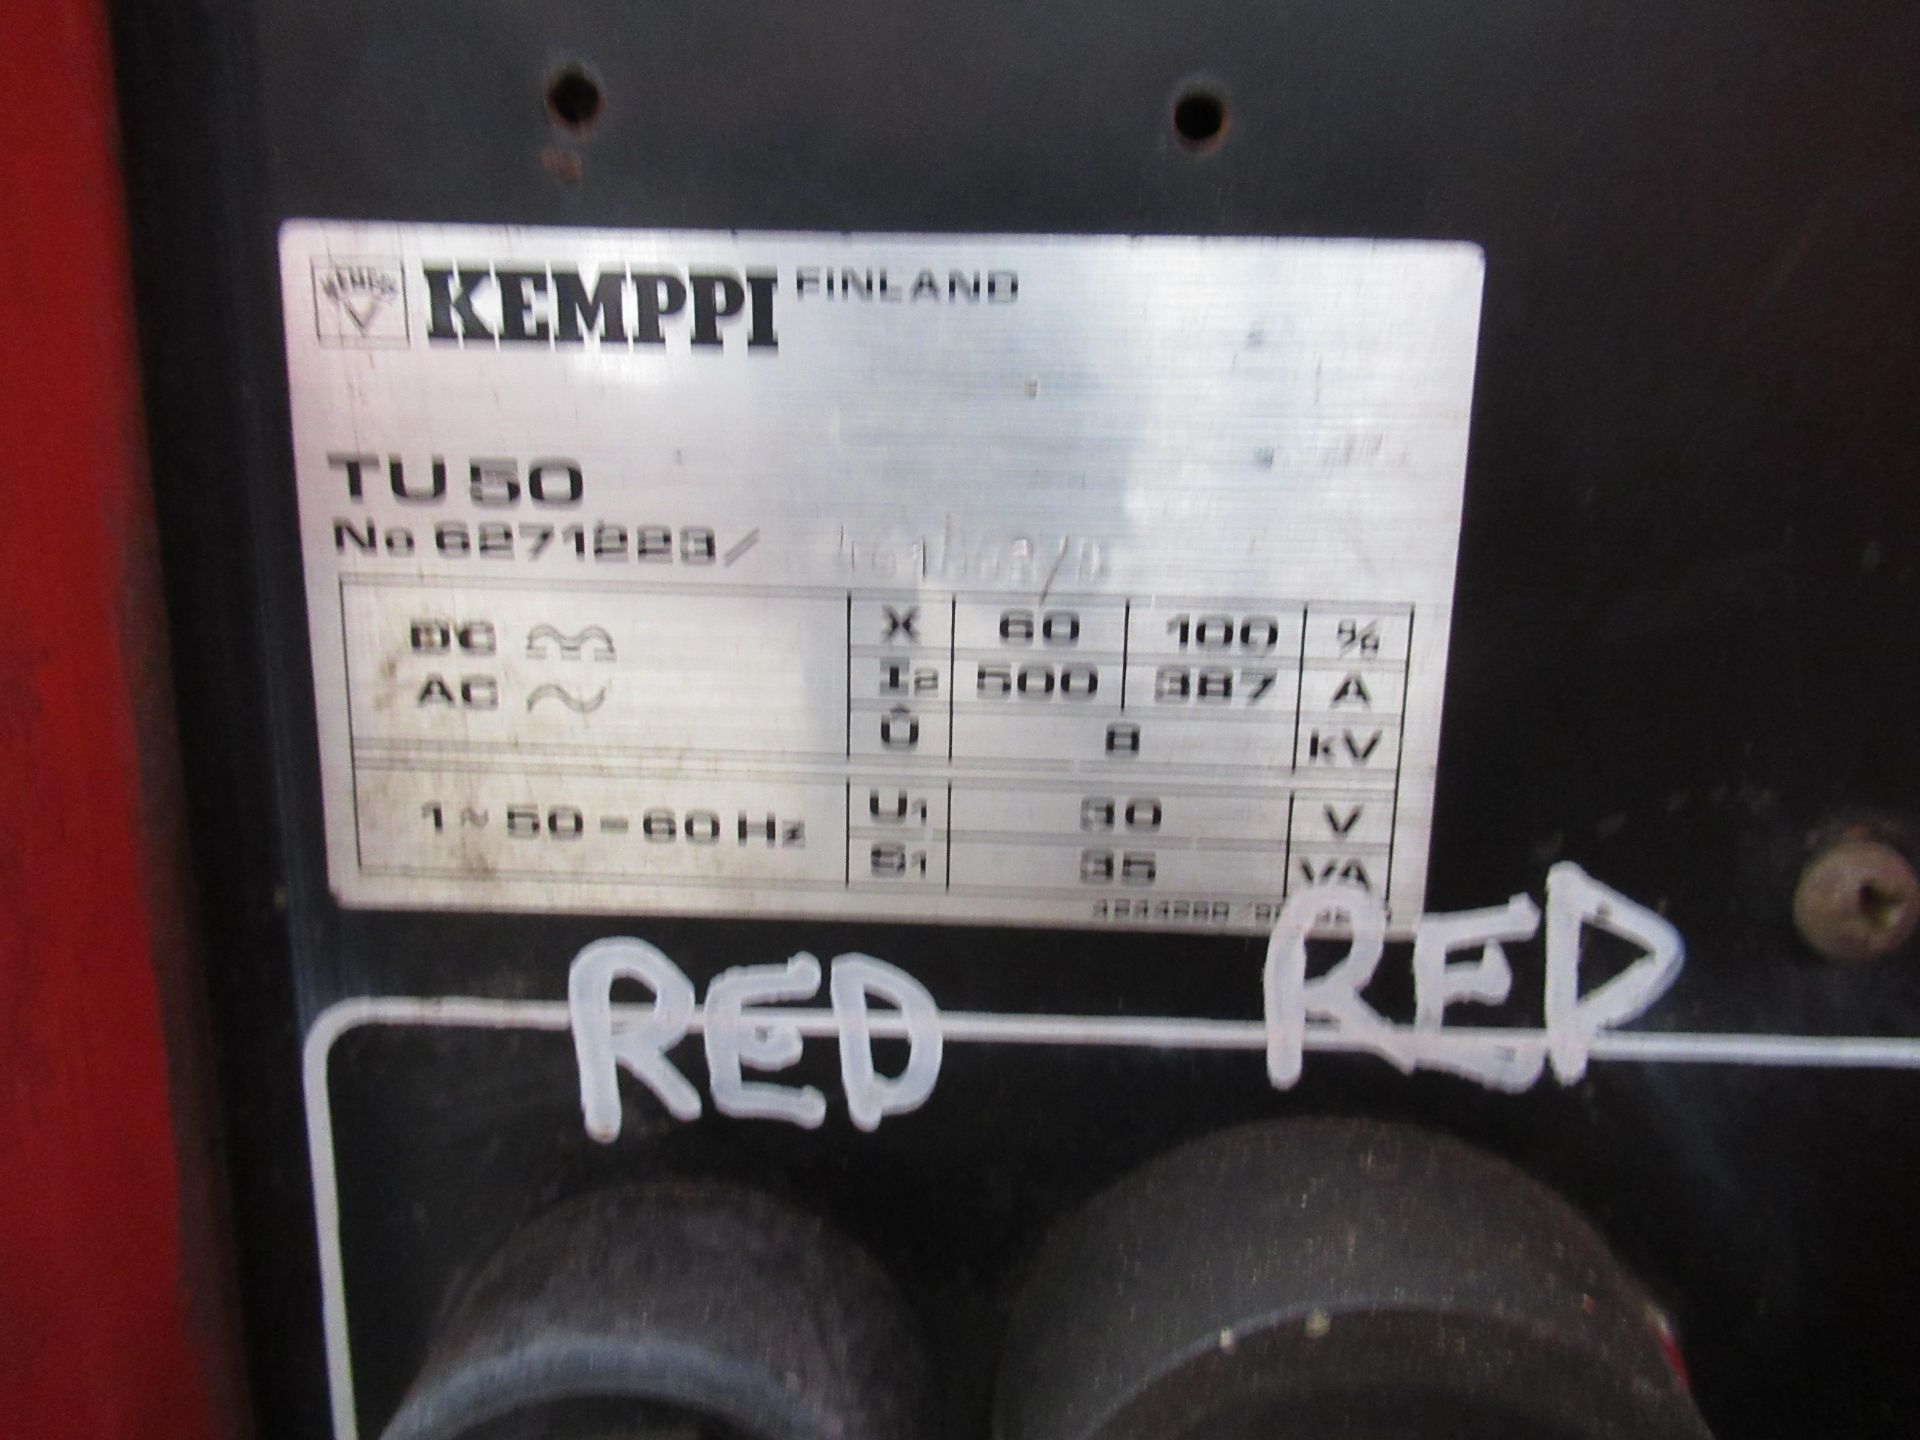 Kemppi PSS5000 welder and Kemppi TU50 controller with torch and leads - Image 7 of 11